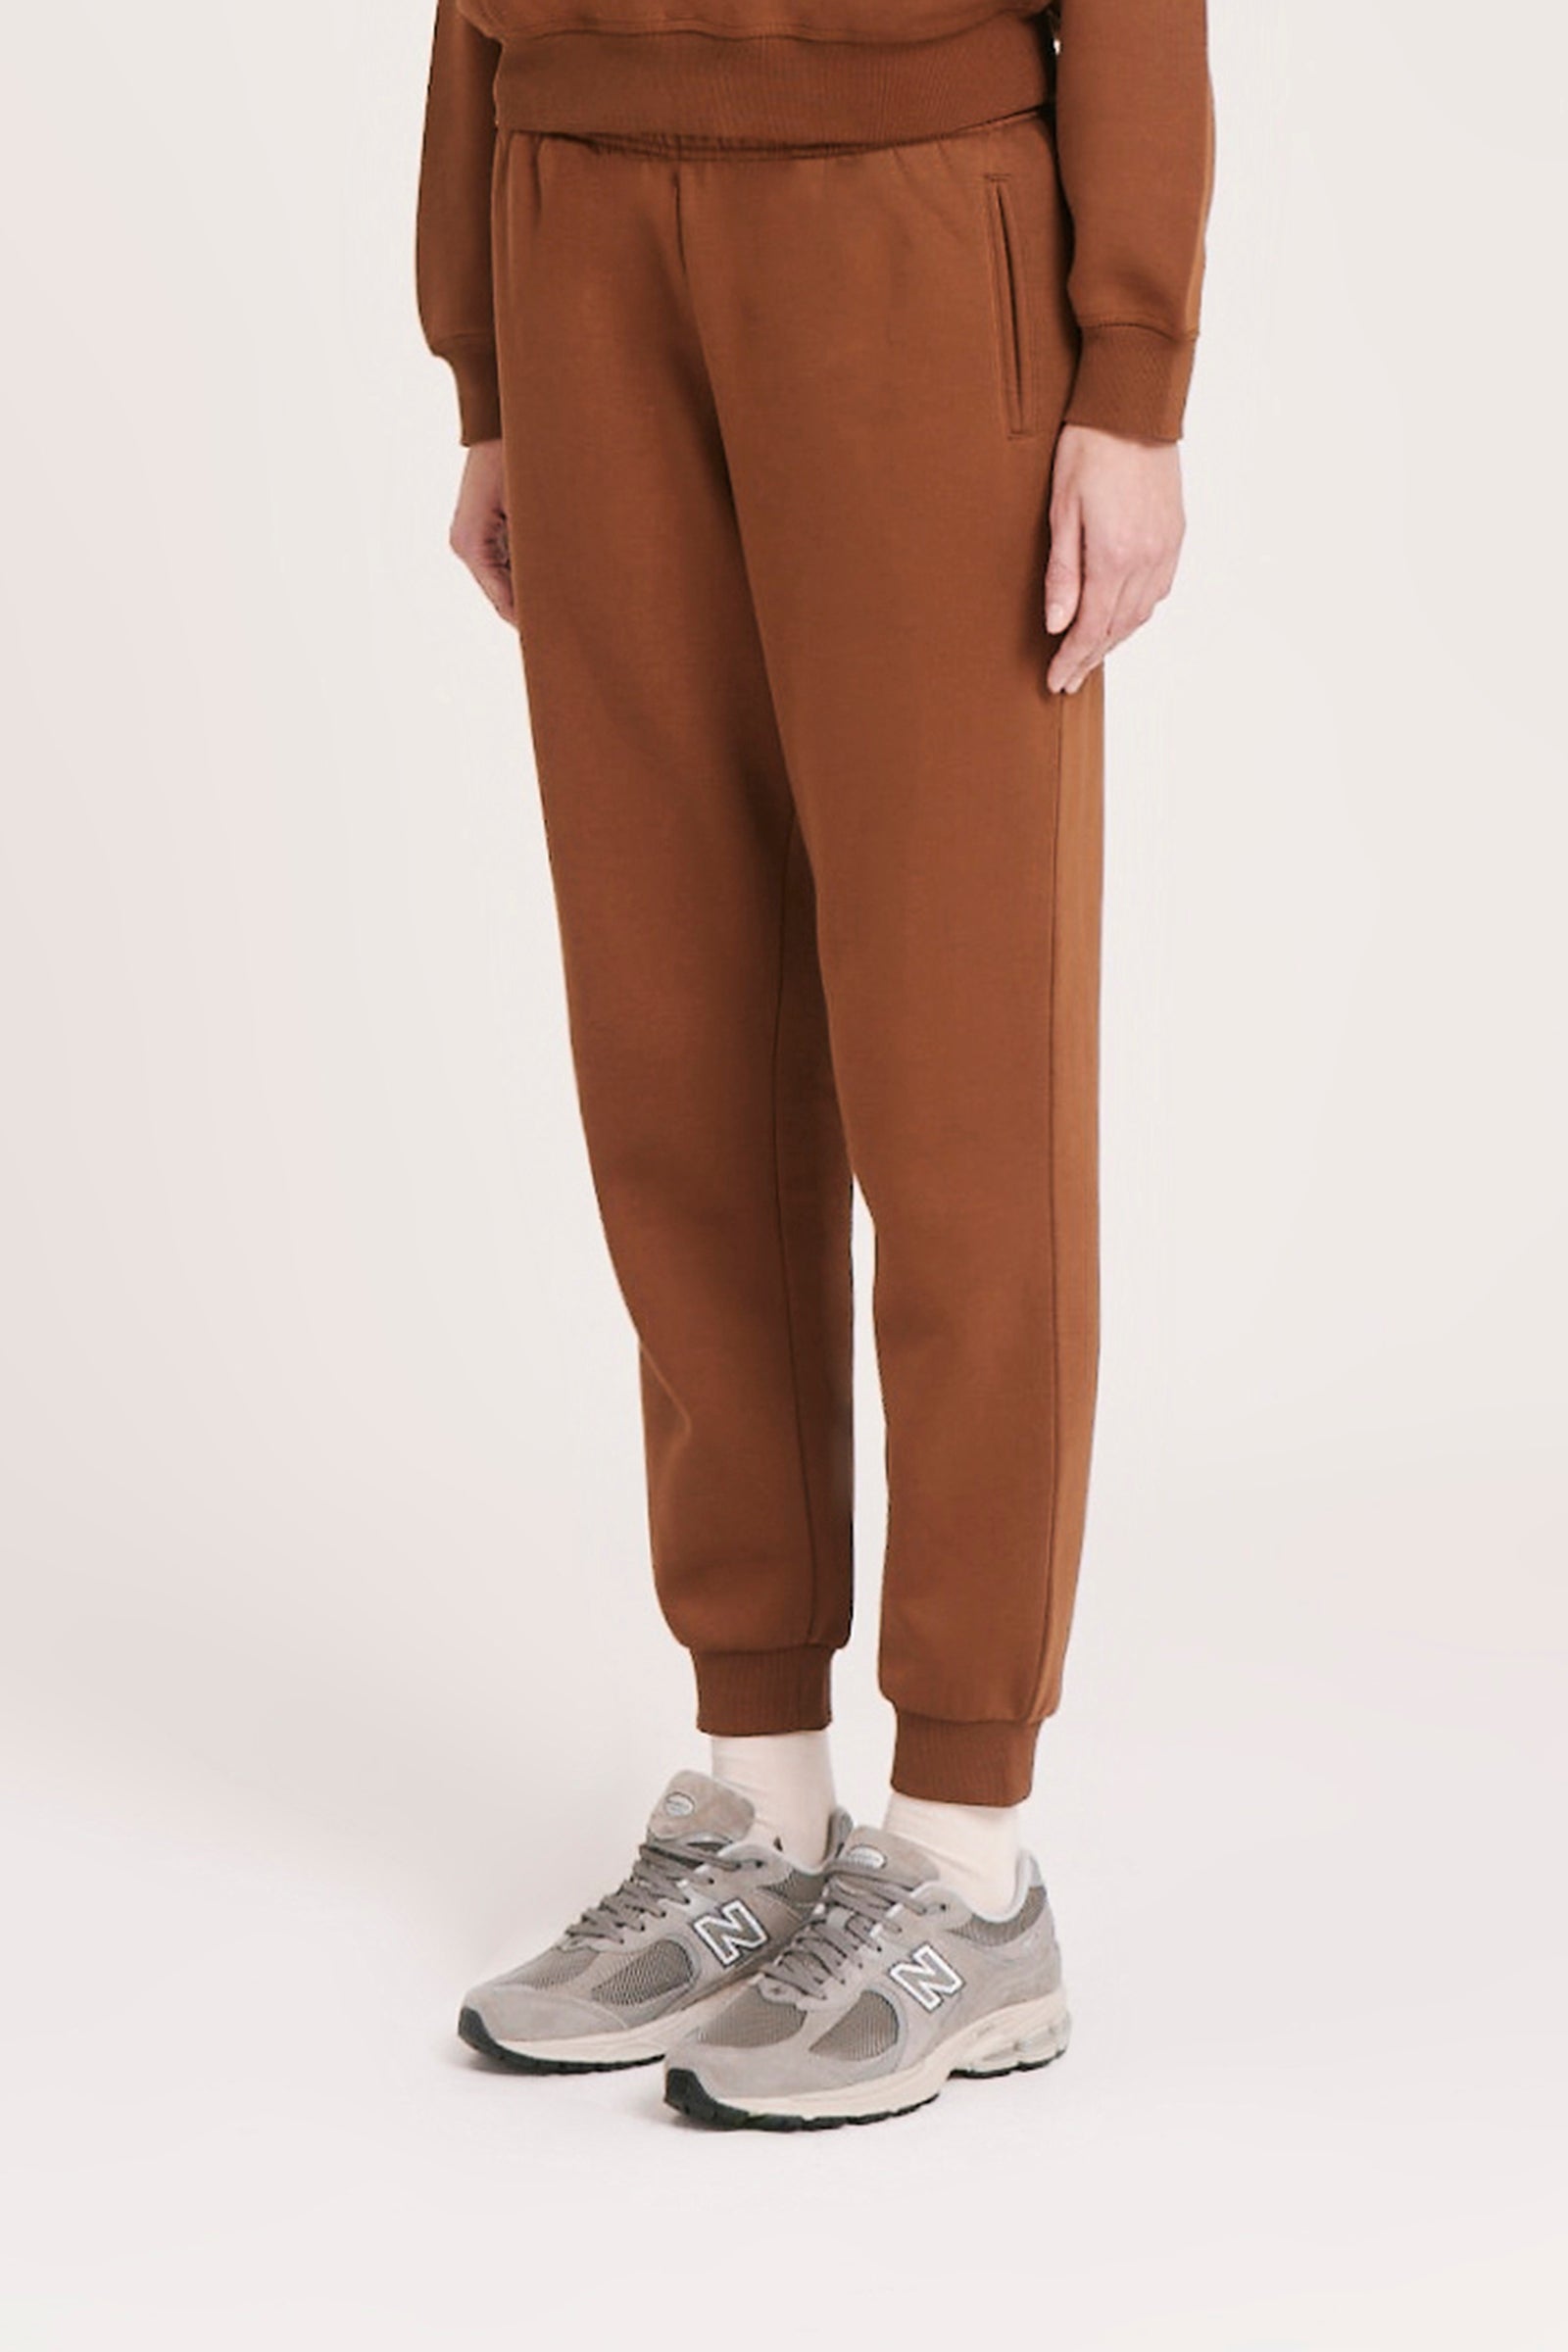 Nude Lucy Carter Classic Trackpant in Toffee